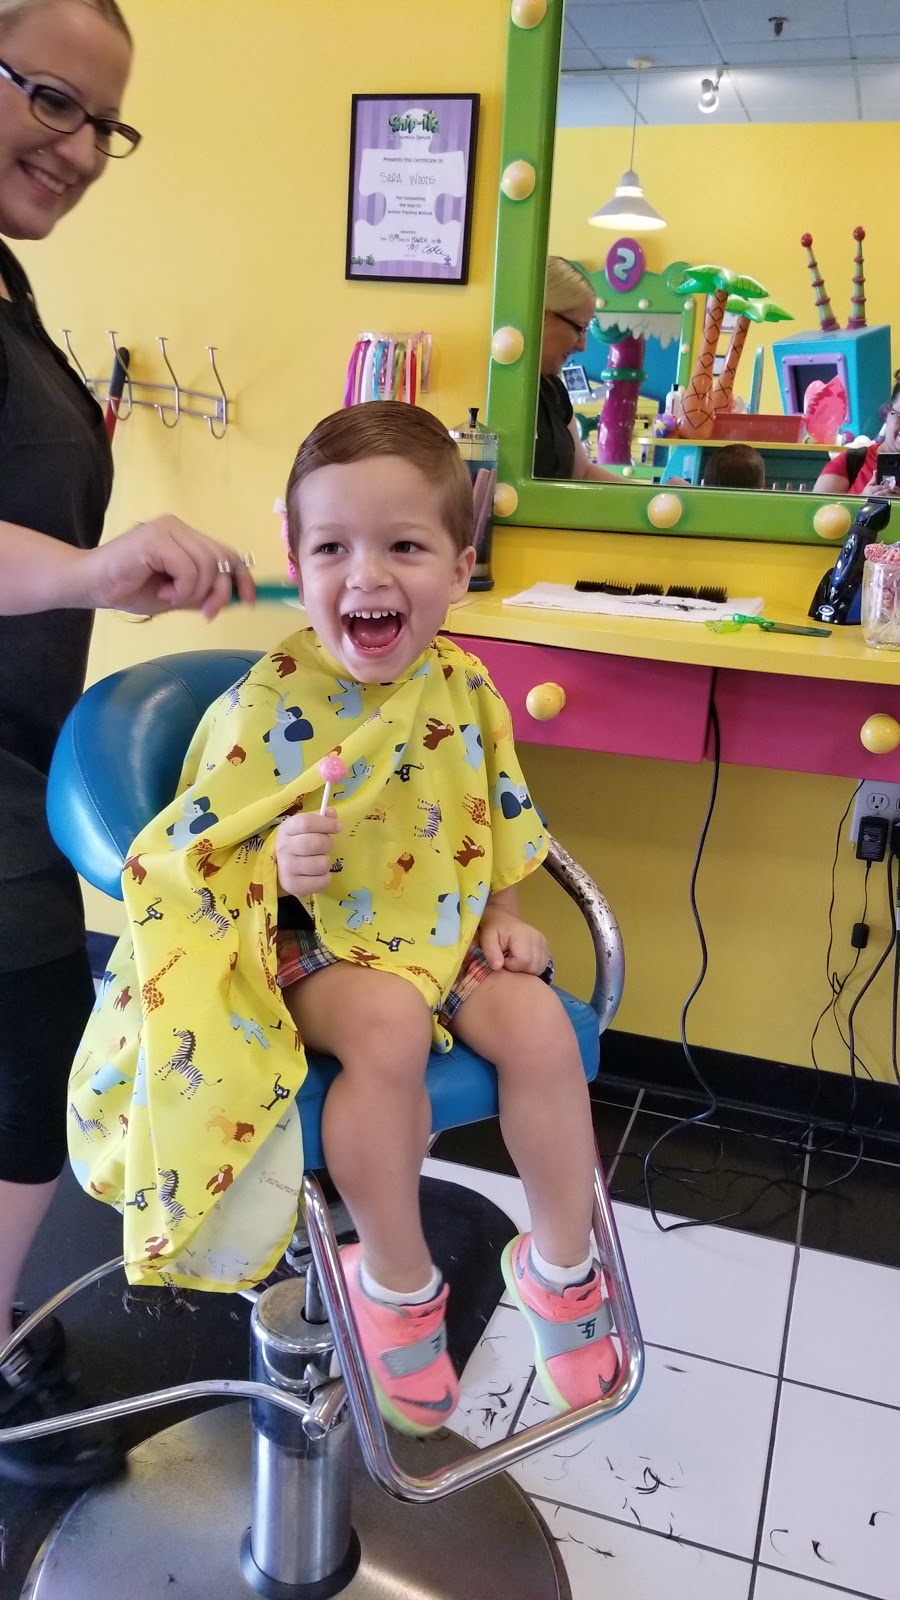 Snip-its Haircuts for Kids | 405 Queen St, Southington, CT 06489 | Phone: (860) 621-6762